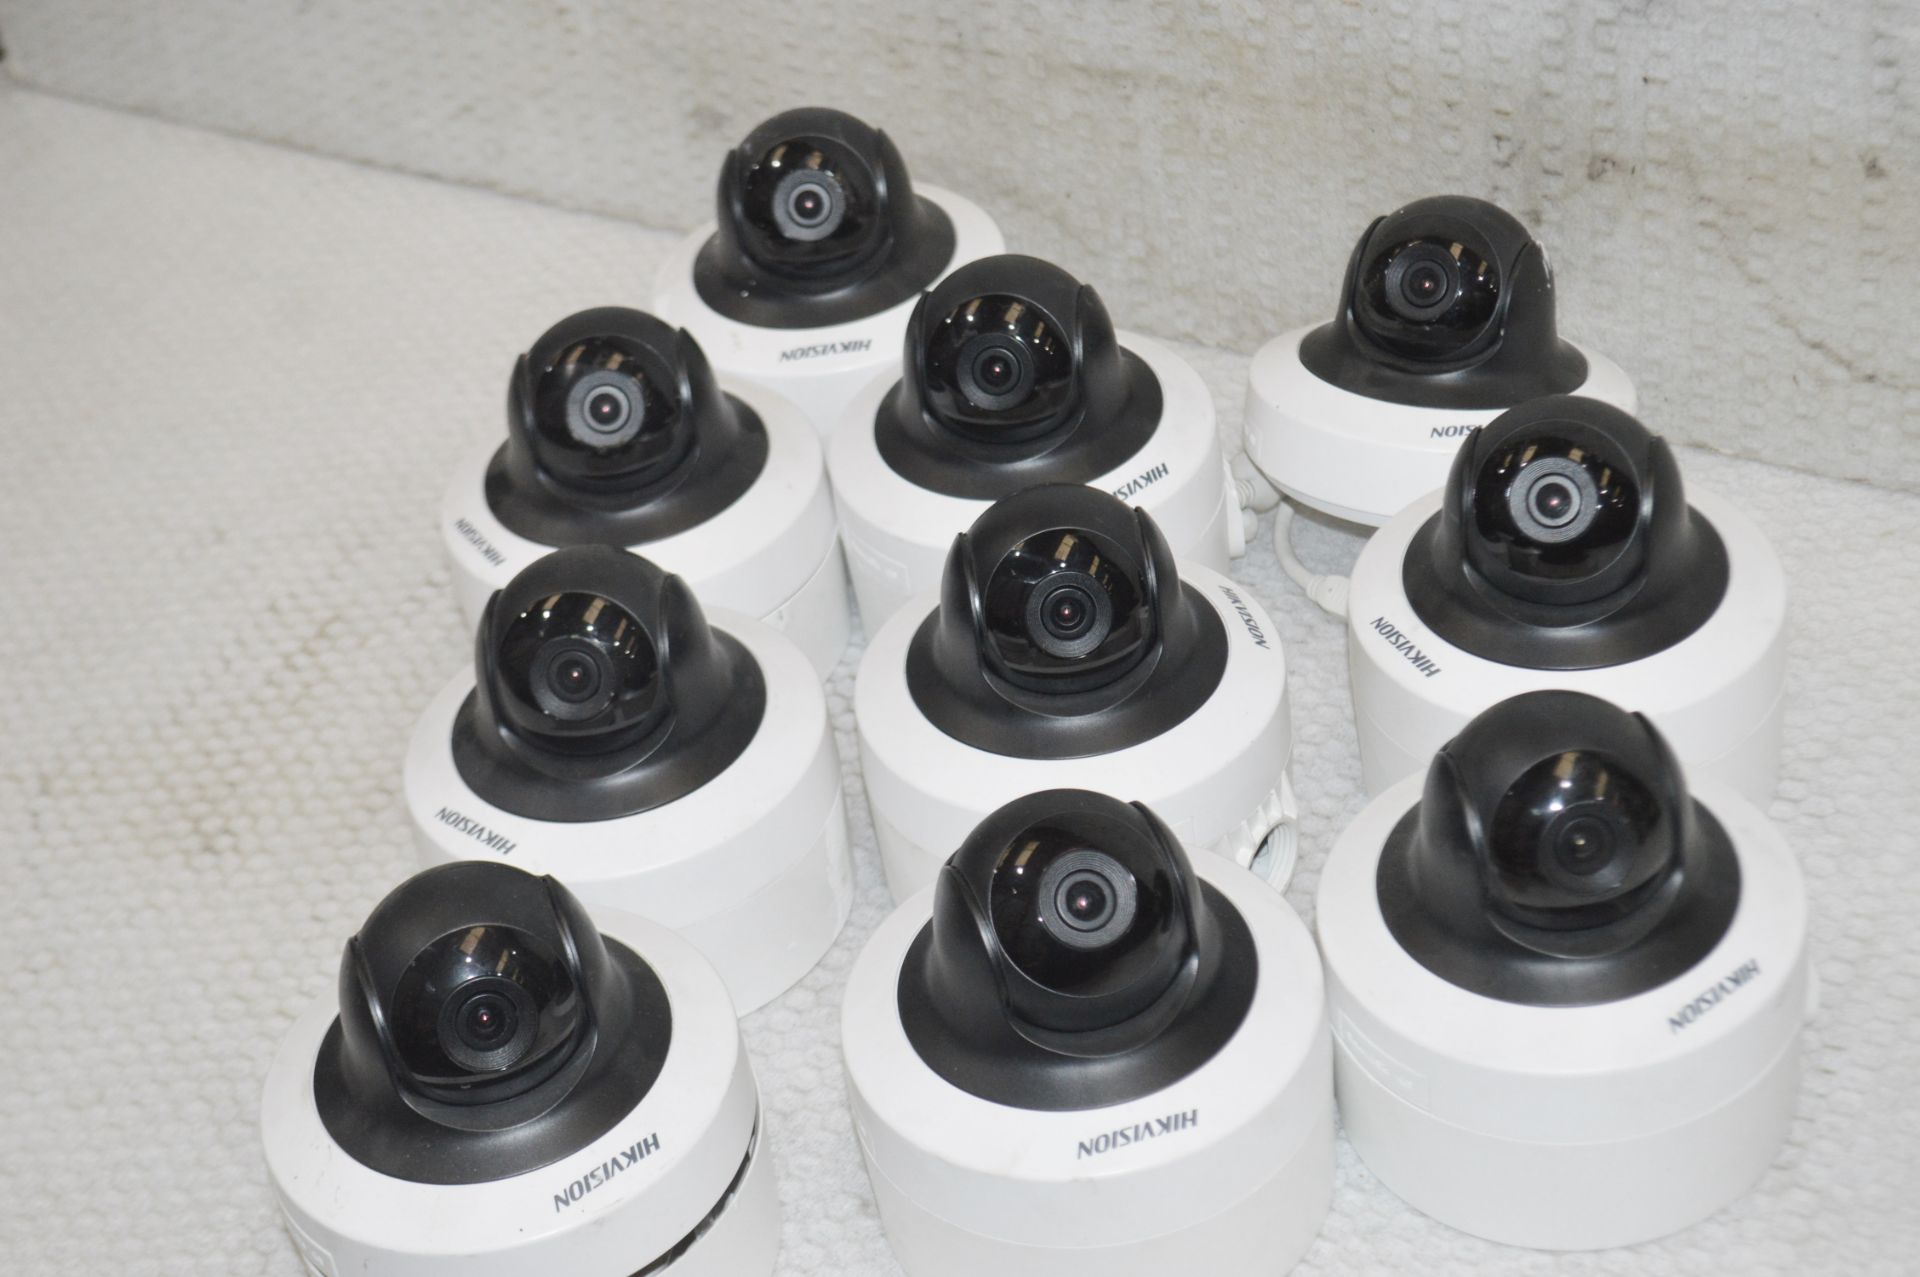 10 x Hikvision Full HD Day/Night Pan/Tilt Network Dome CCTV Security Cameras - Model number: DS- - Image 5 of 7